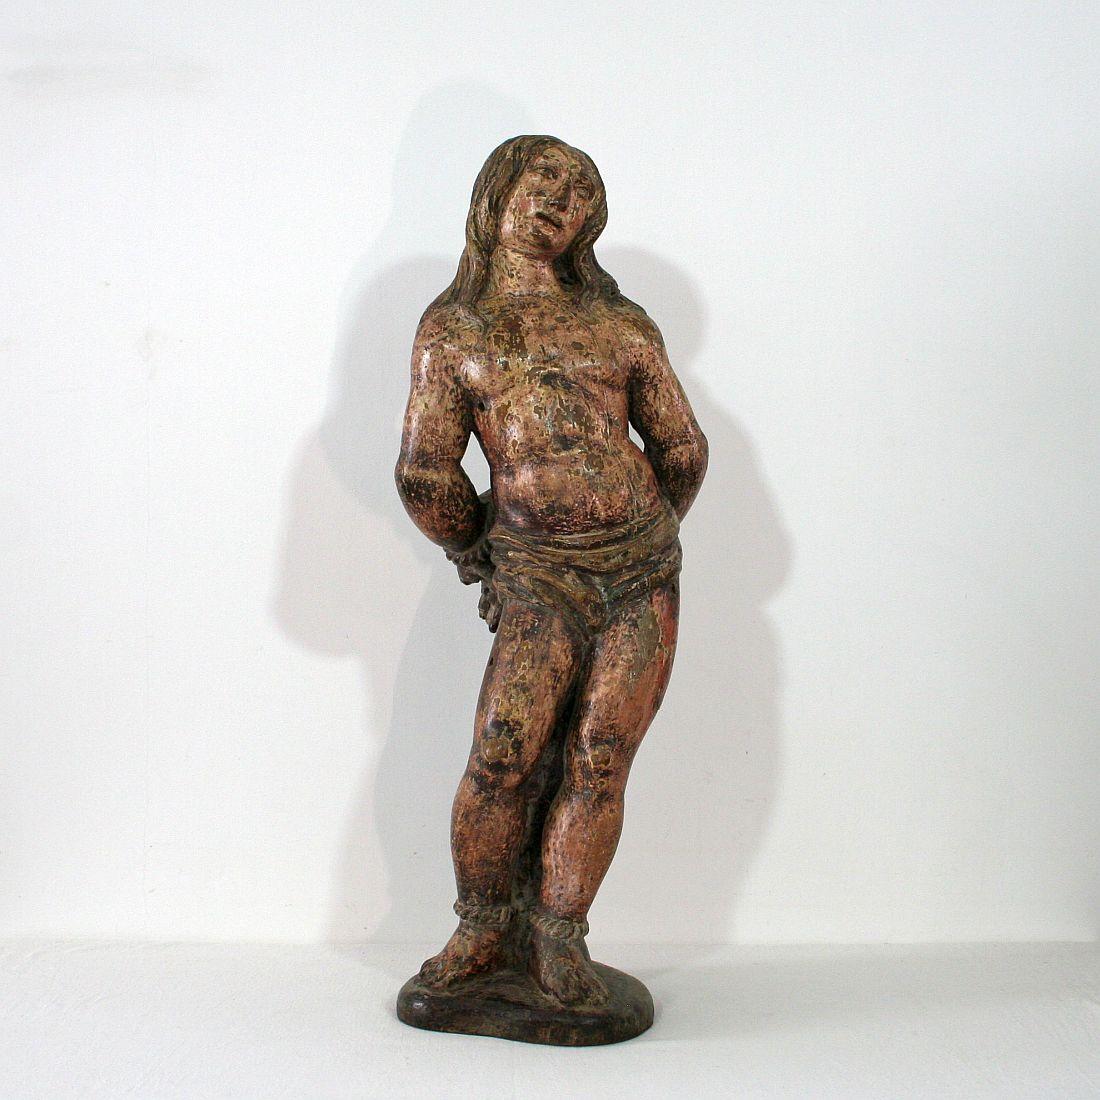 Hand-Painted French 16th-17th Century Painted Wooden Statue of Saint Sebastian